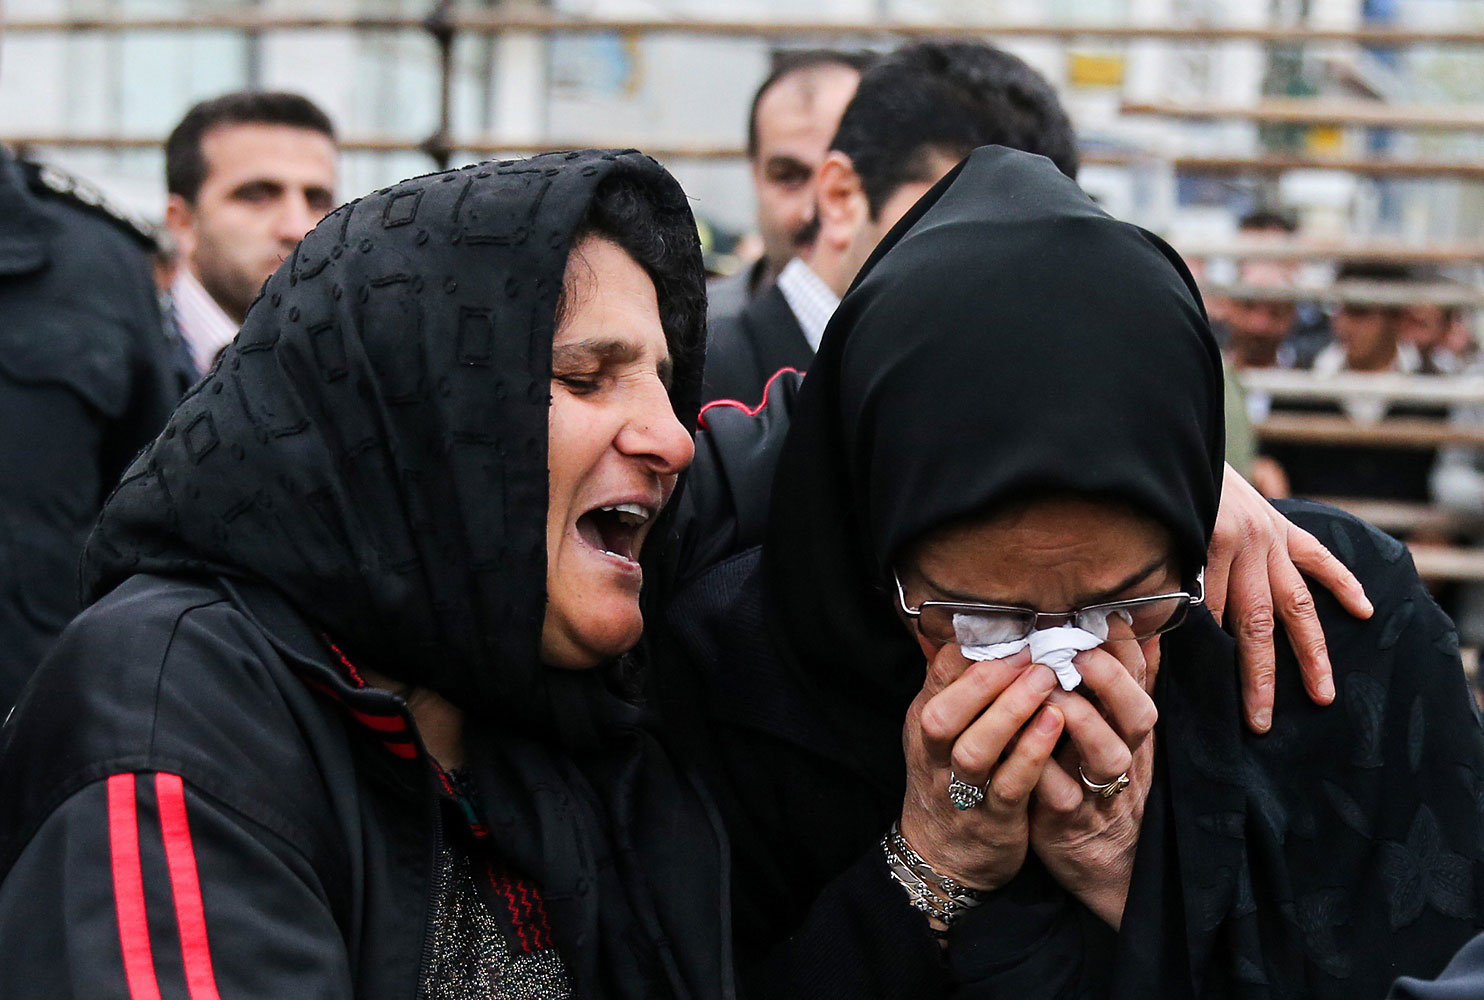 The mother of an Iranian man Balal who killed an Iranian youth Abdolah Hosseinzadeh in a street fight with a knife in 2007, cries with the mother of Abdolah Hosseinzadeh after she forgave Balal, giving him an emotional slap prior to removing the noose around his neck in the gallows during his execution ceremony in the northern city of Nowshahr on April 15, 2014.